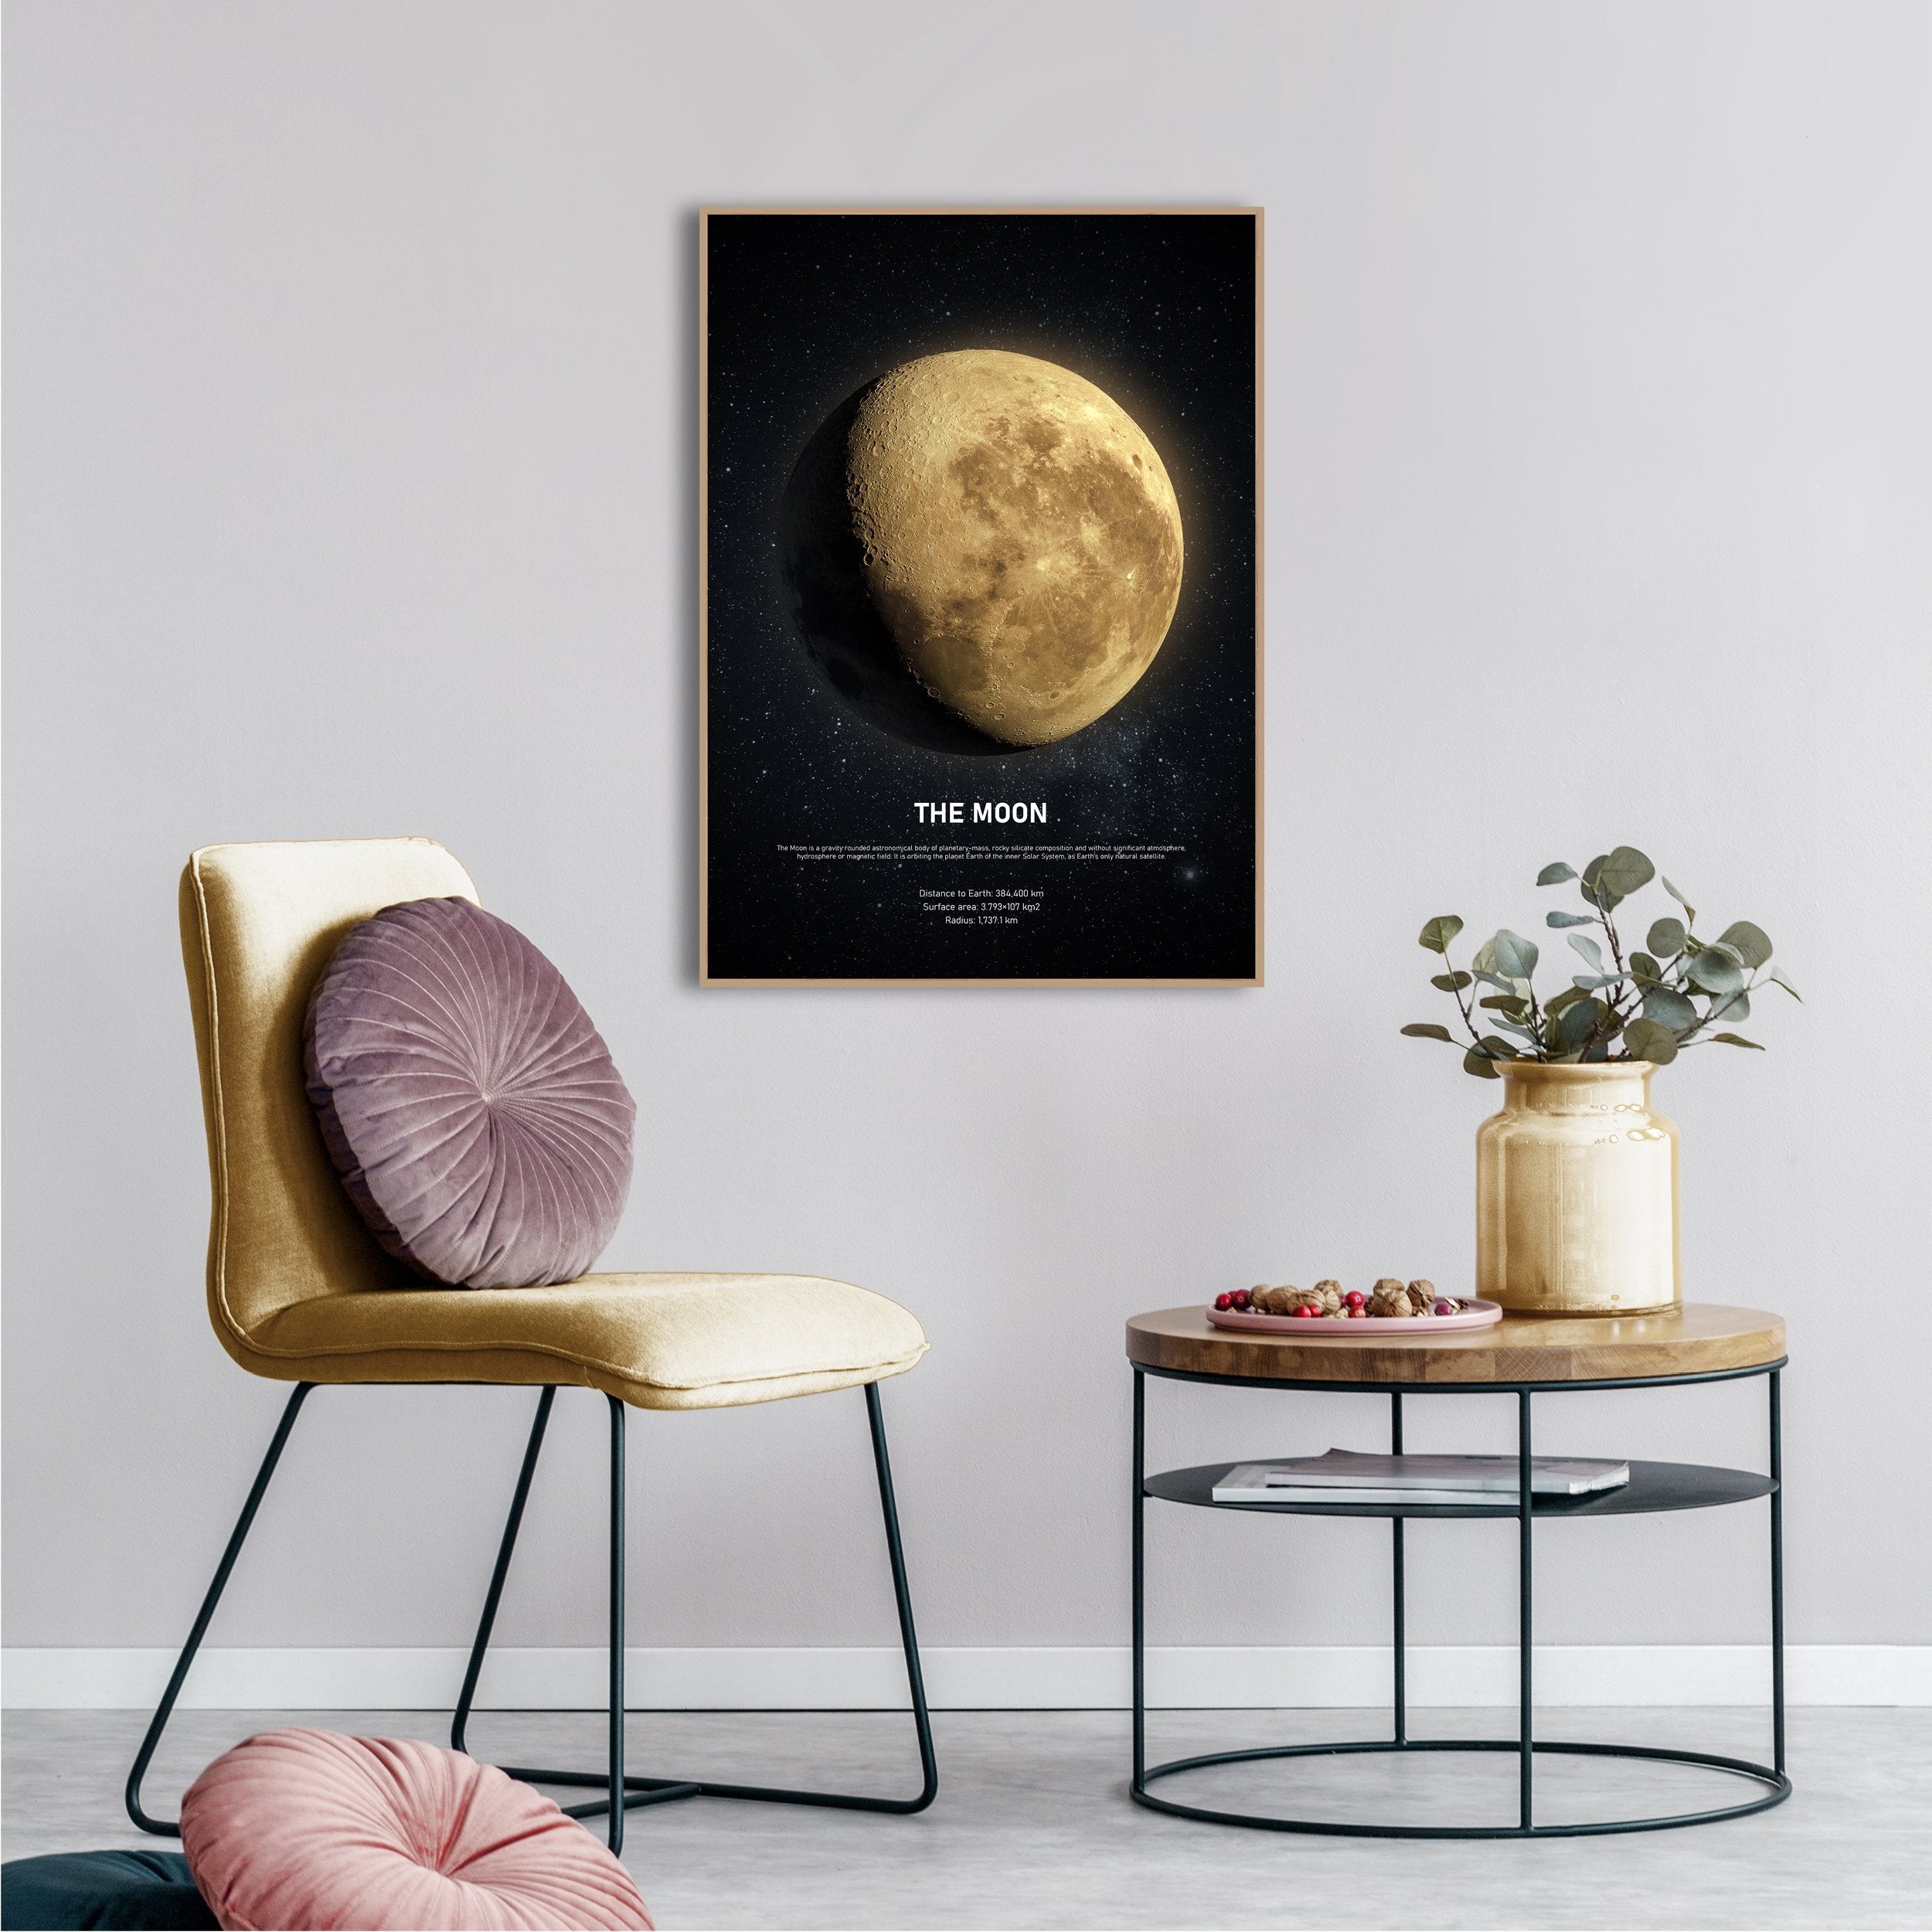 The Moon | POSTER BOARD